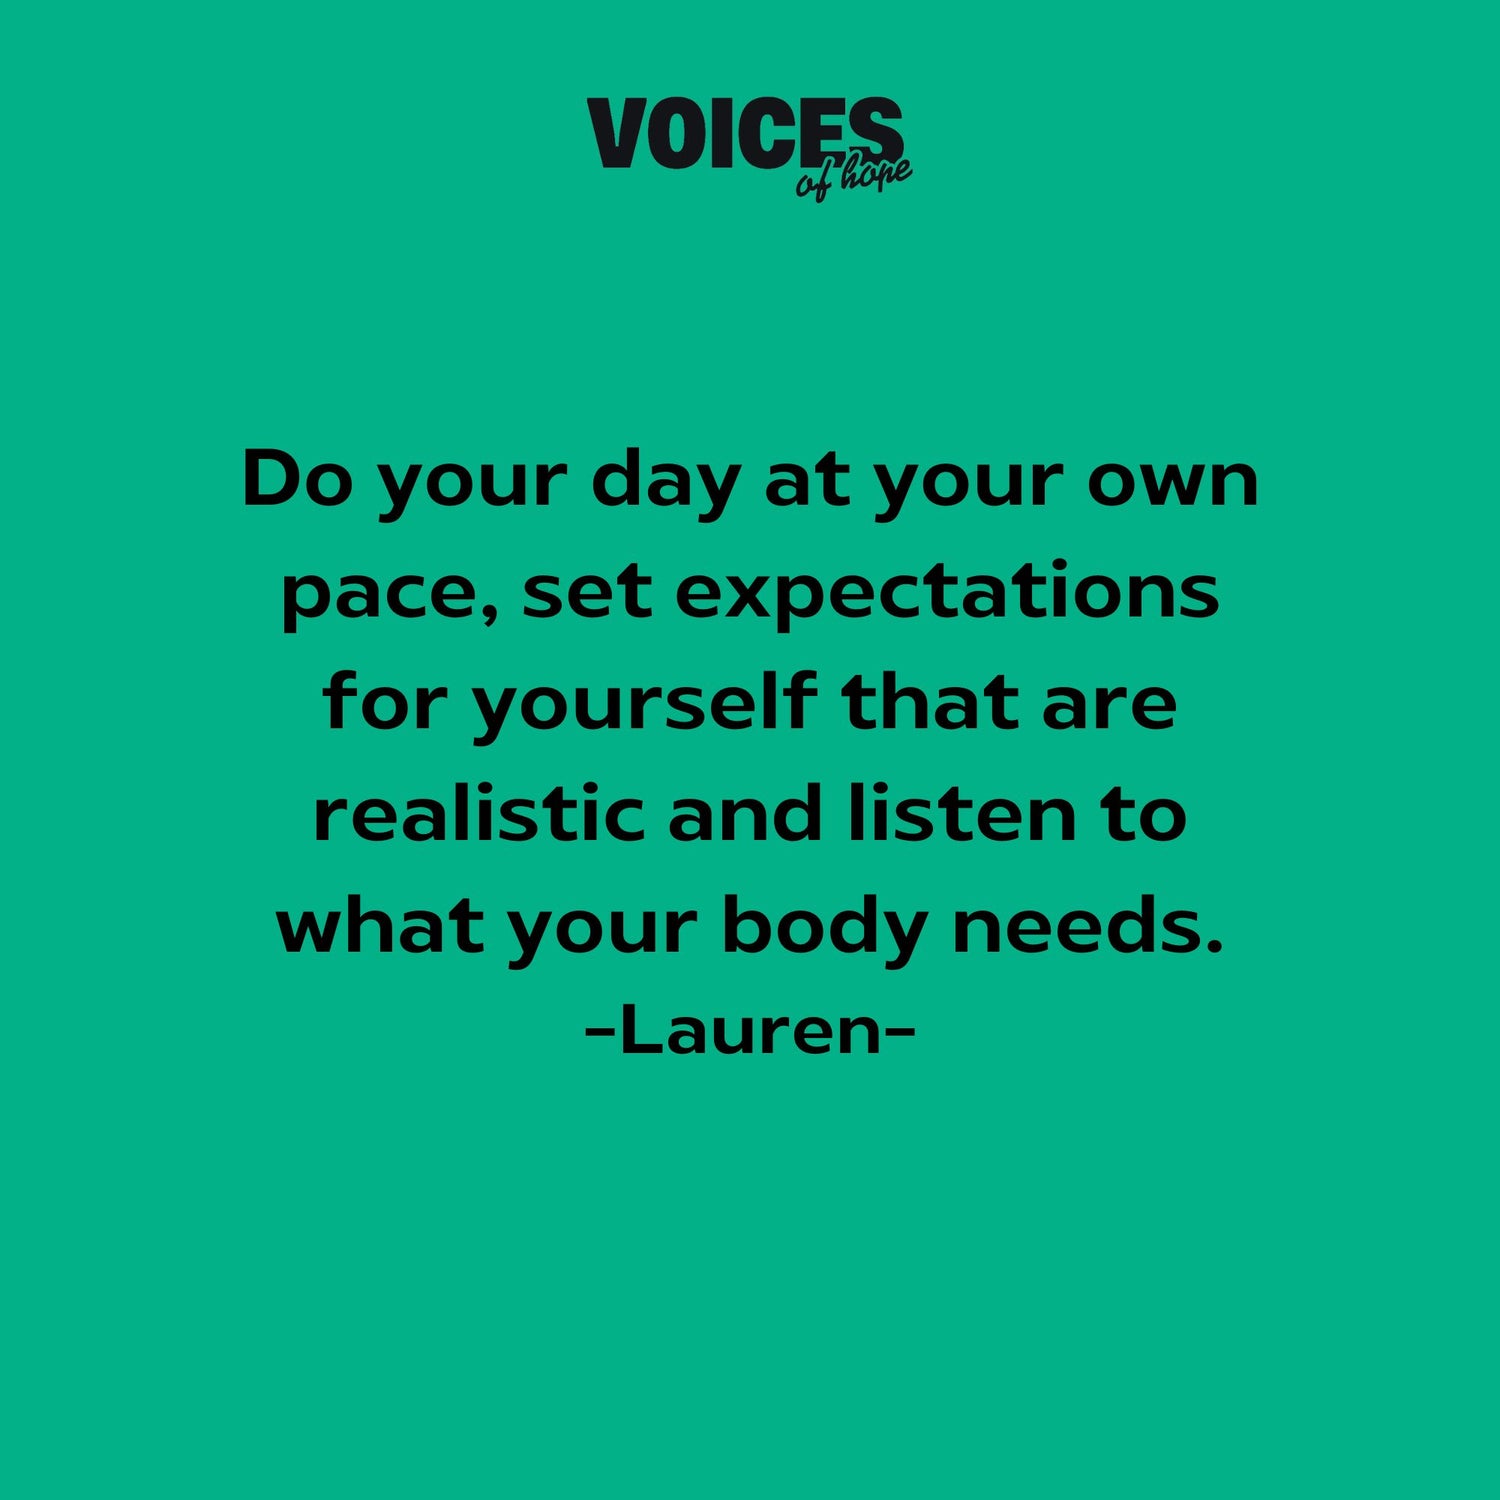 Green background with black writing that reads: "do your day at your own pace, set expectations for yourself that are realistic and listen to what your body needs. Lauren."